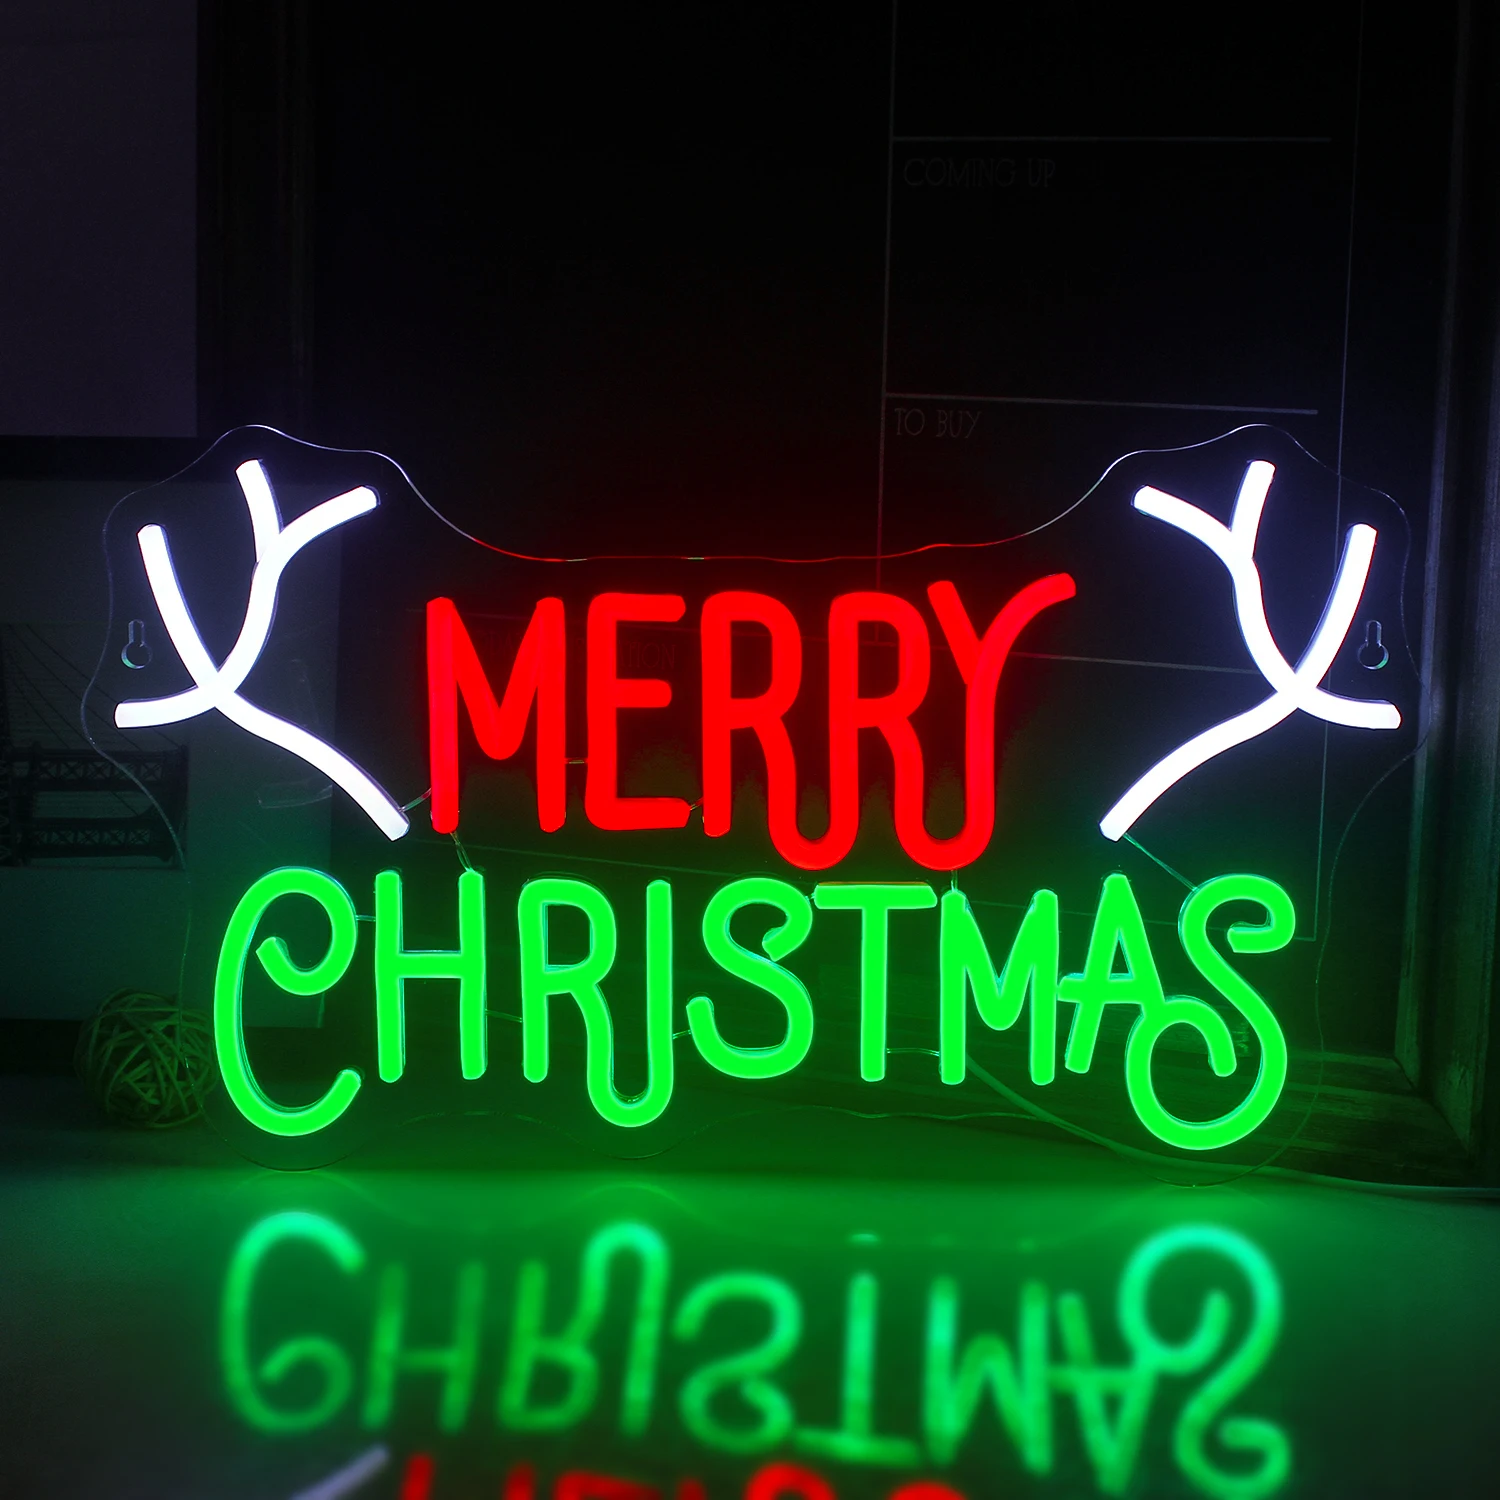 Merry Christmas Neon Sign Led Neon Wall Light Acrylic Board for Christmas Party Supplies Bedroom Wedding Bar Pub Club Christmas christmas neon usb neon lights led acrylic board neon signs for wall decor christmas party supplies bedroom bar pub club